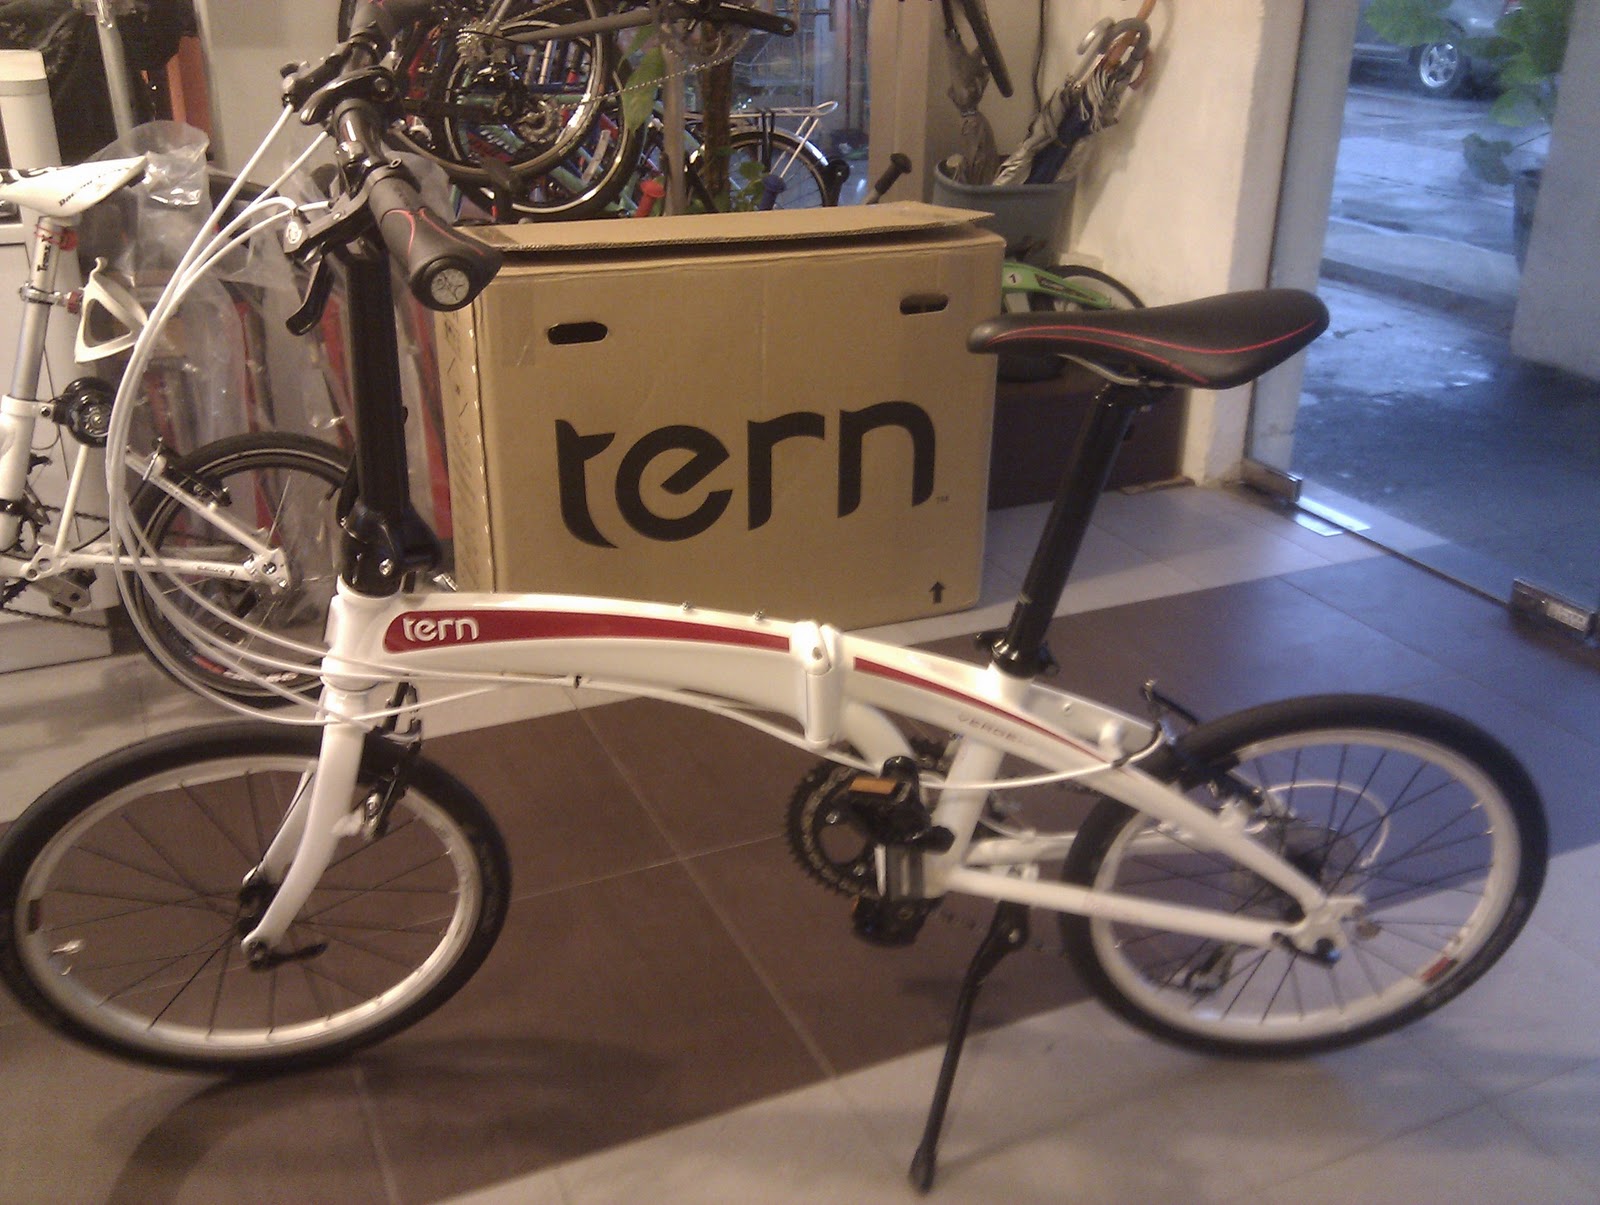 Hands On Bike First Look at Tern Bicycles!